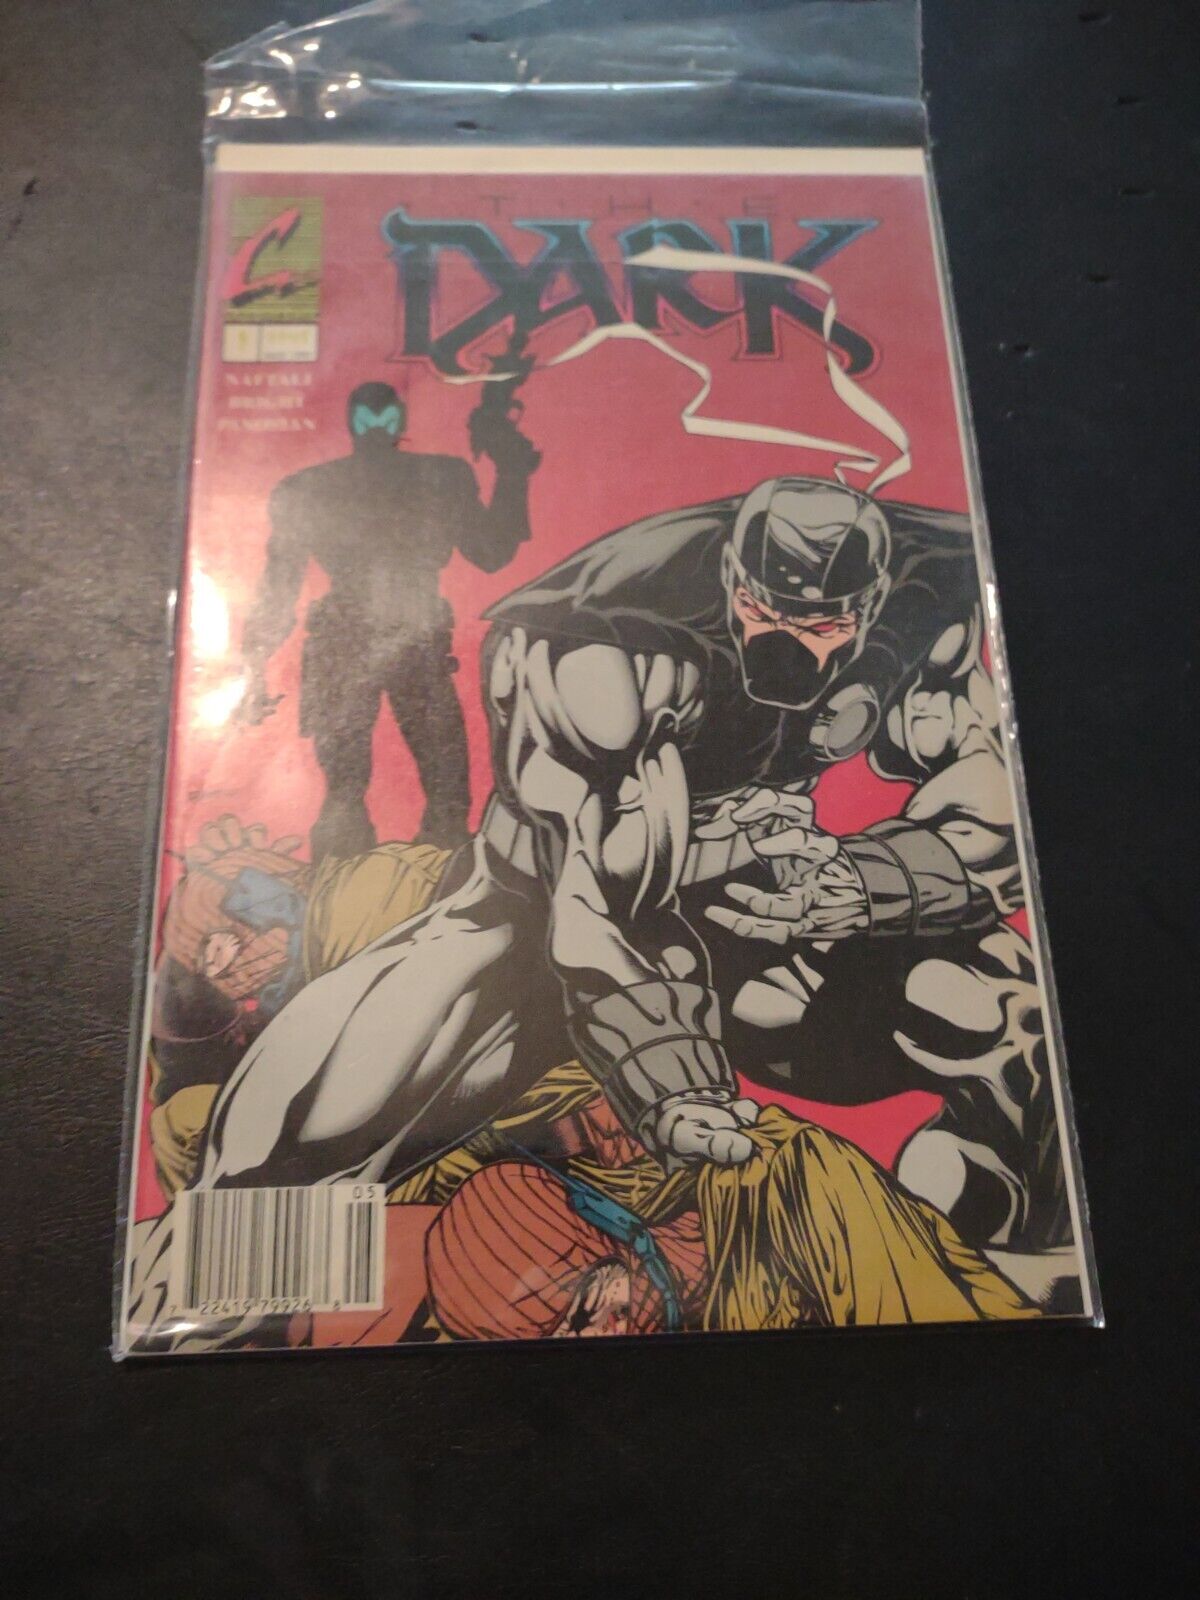 VINTAGE 1993 MAY #1 JUNE #2 CONTINUM COMICS DOUBLE SIDE THE DARK